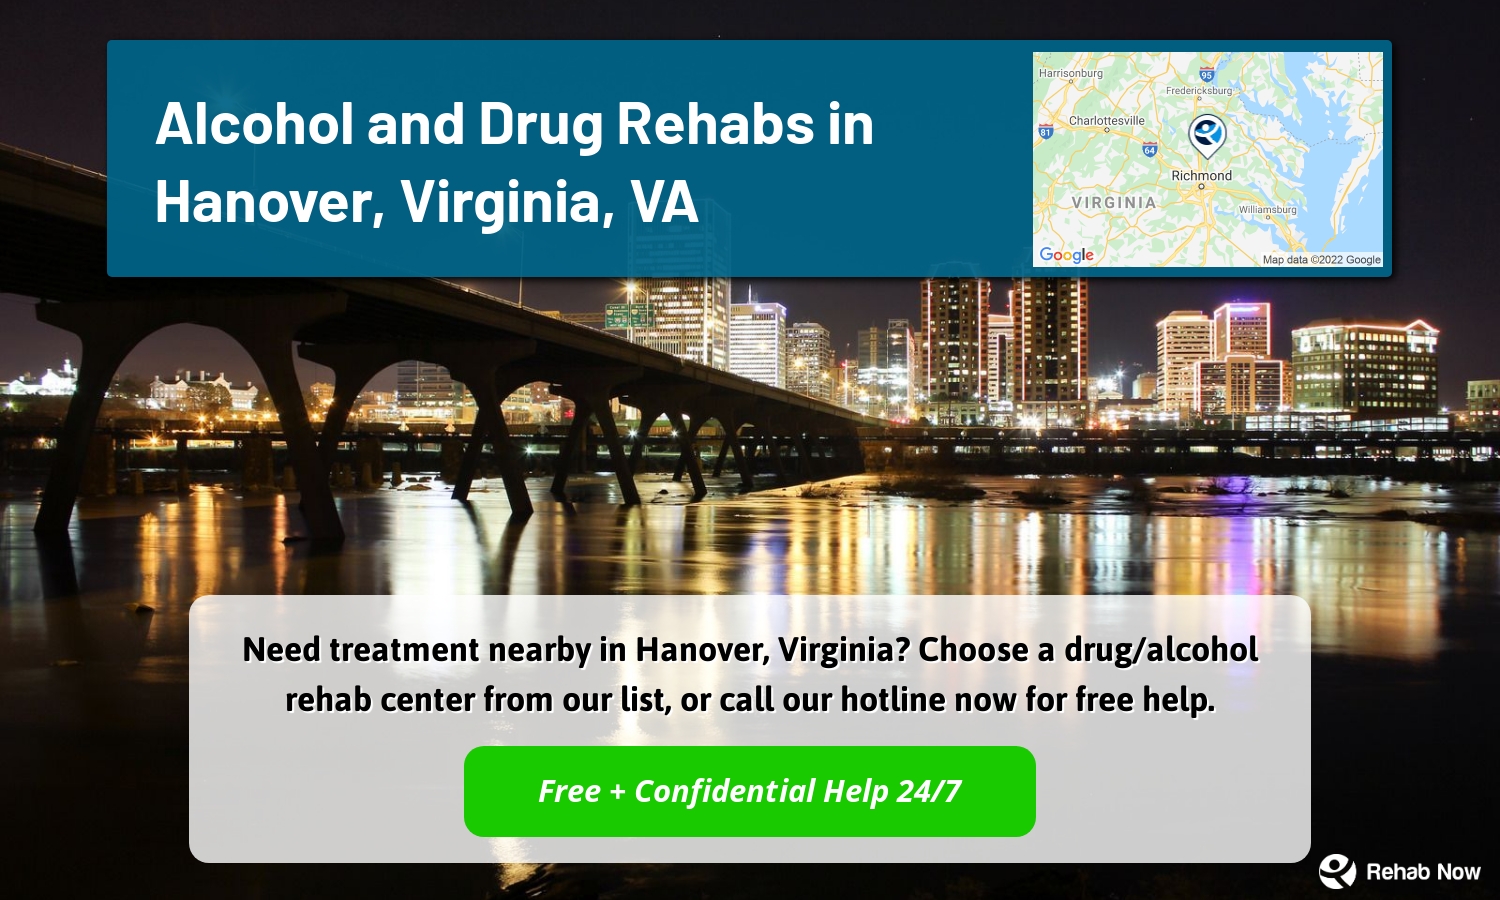 Need treatment nearby in Hanover, Virginia? Choose a drug/alcohol rehab center from our list, or call our hotline now for free help.